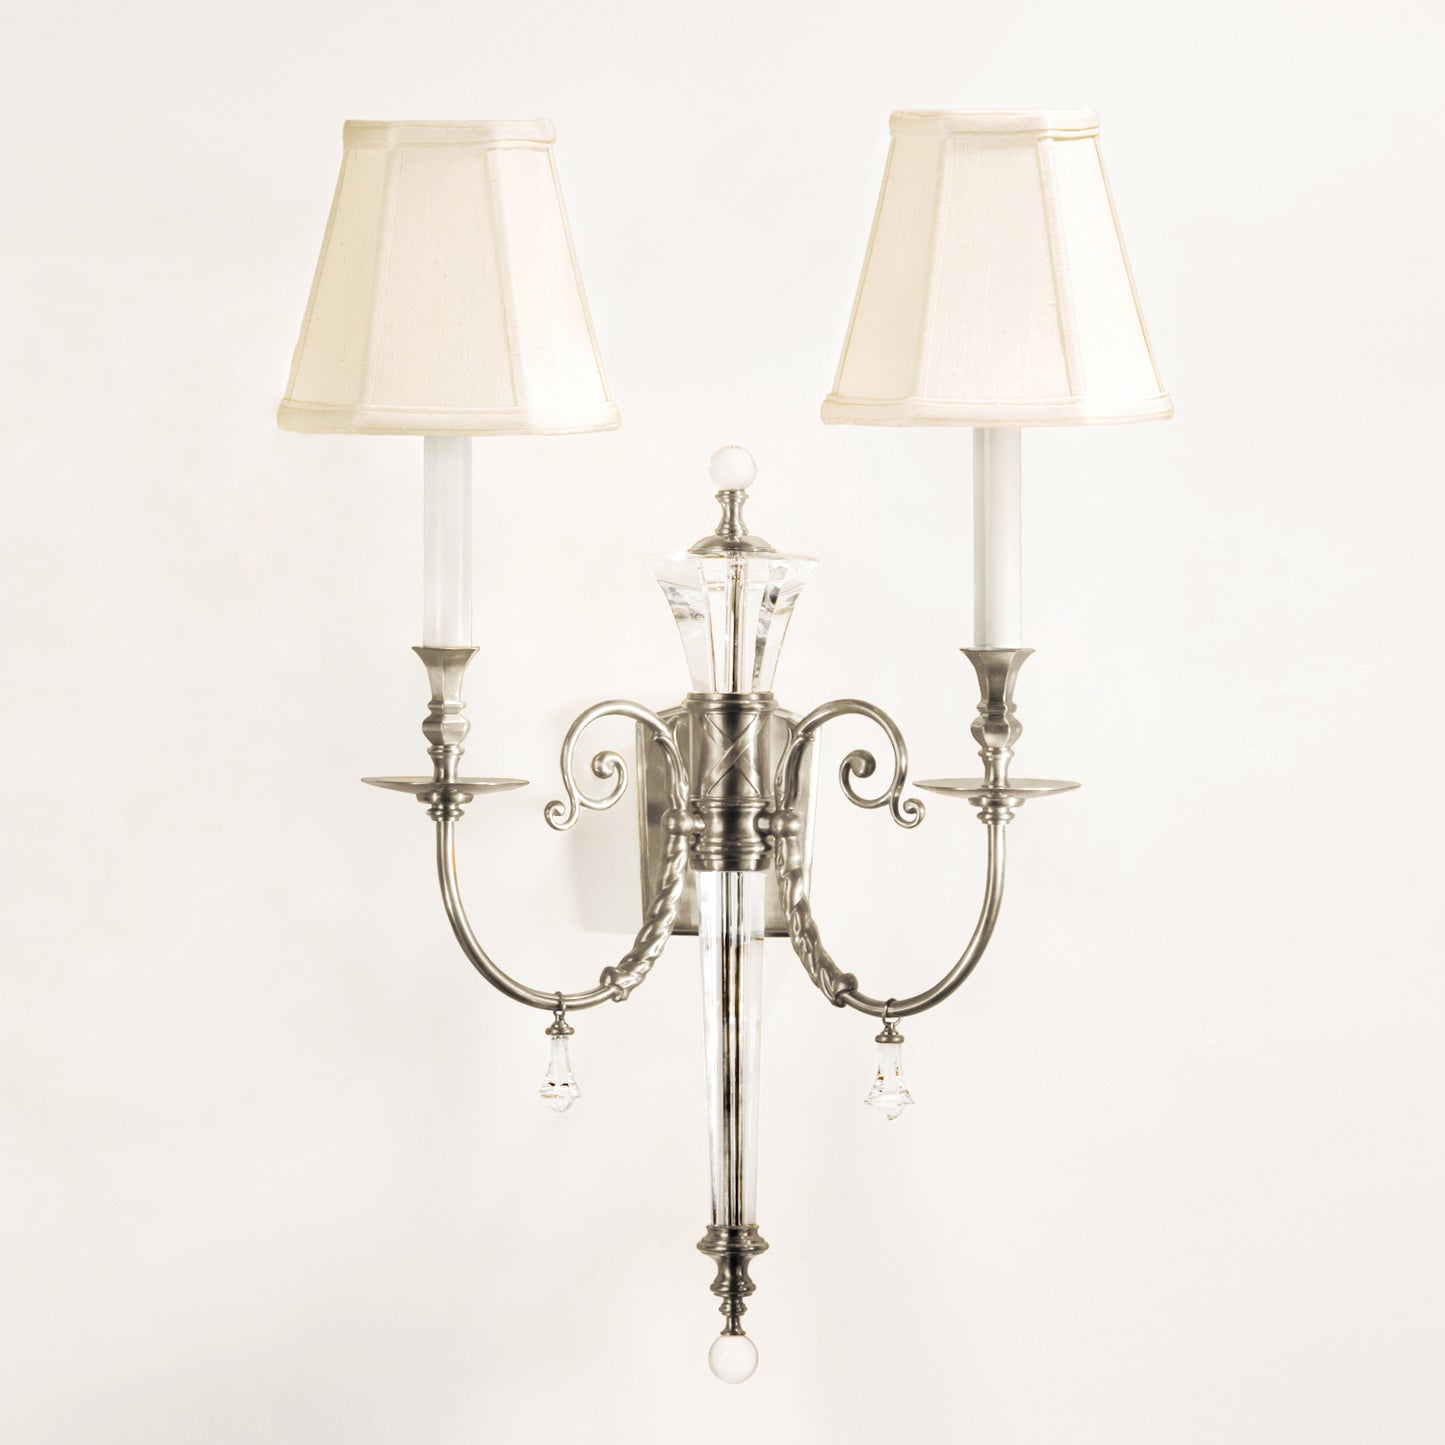 Crystal and polished nickel wall sconce.